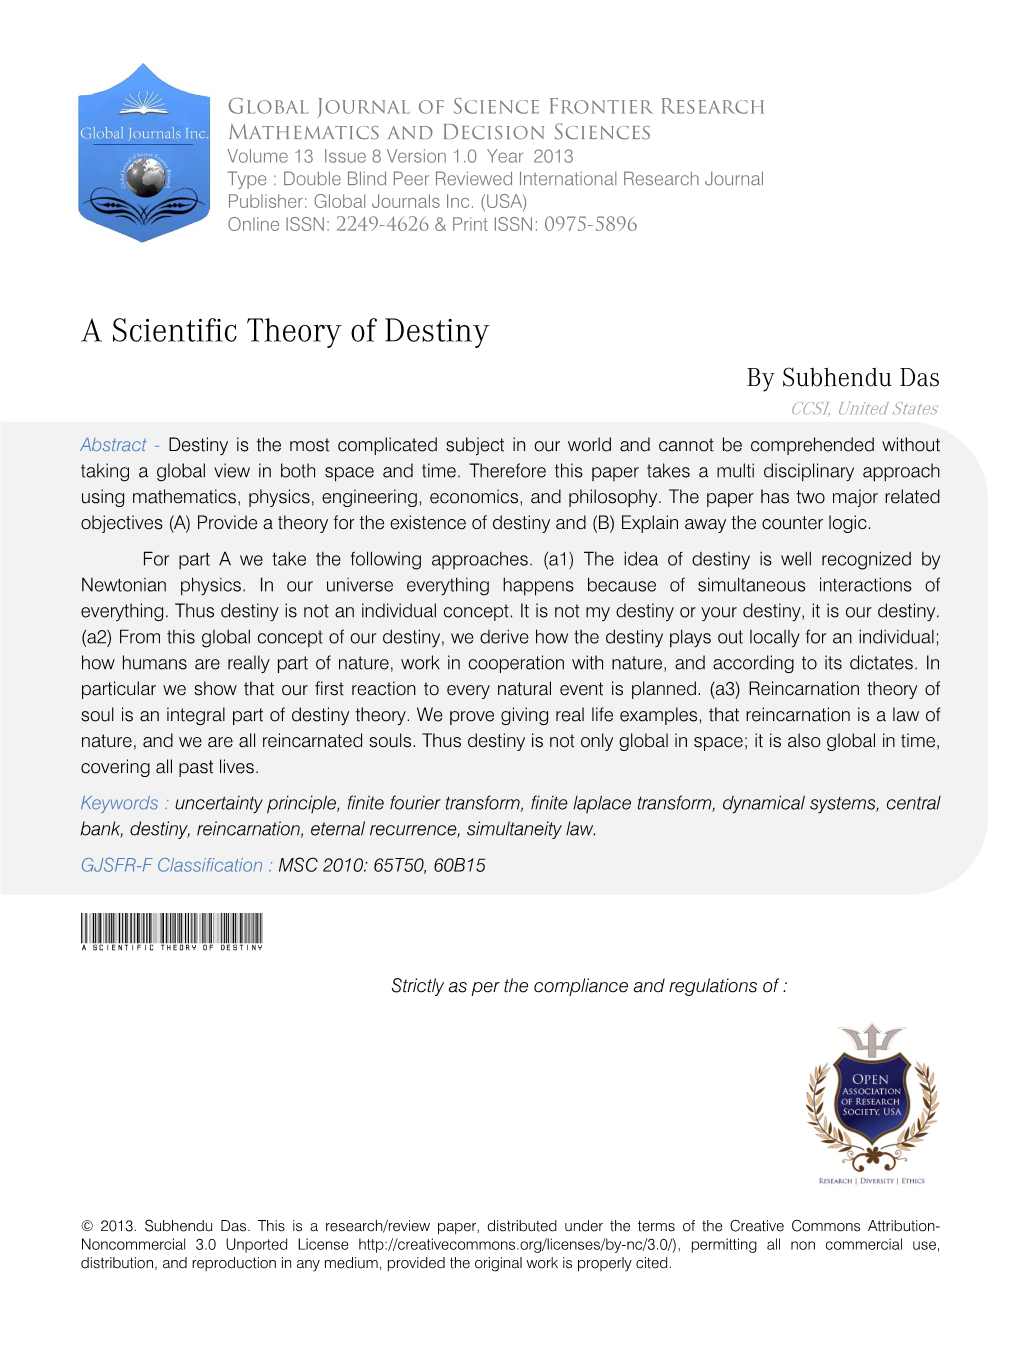 A Scientific Theory of Destiny